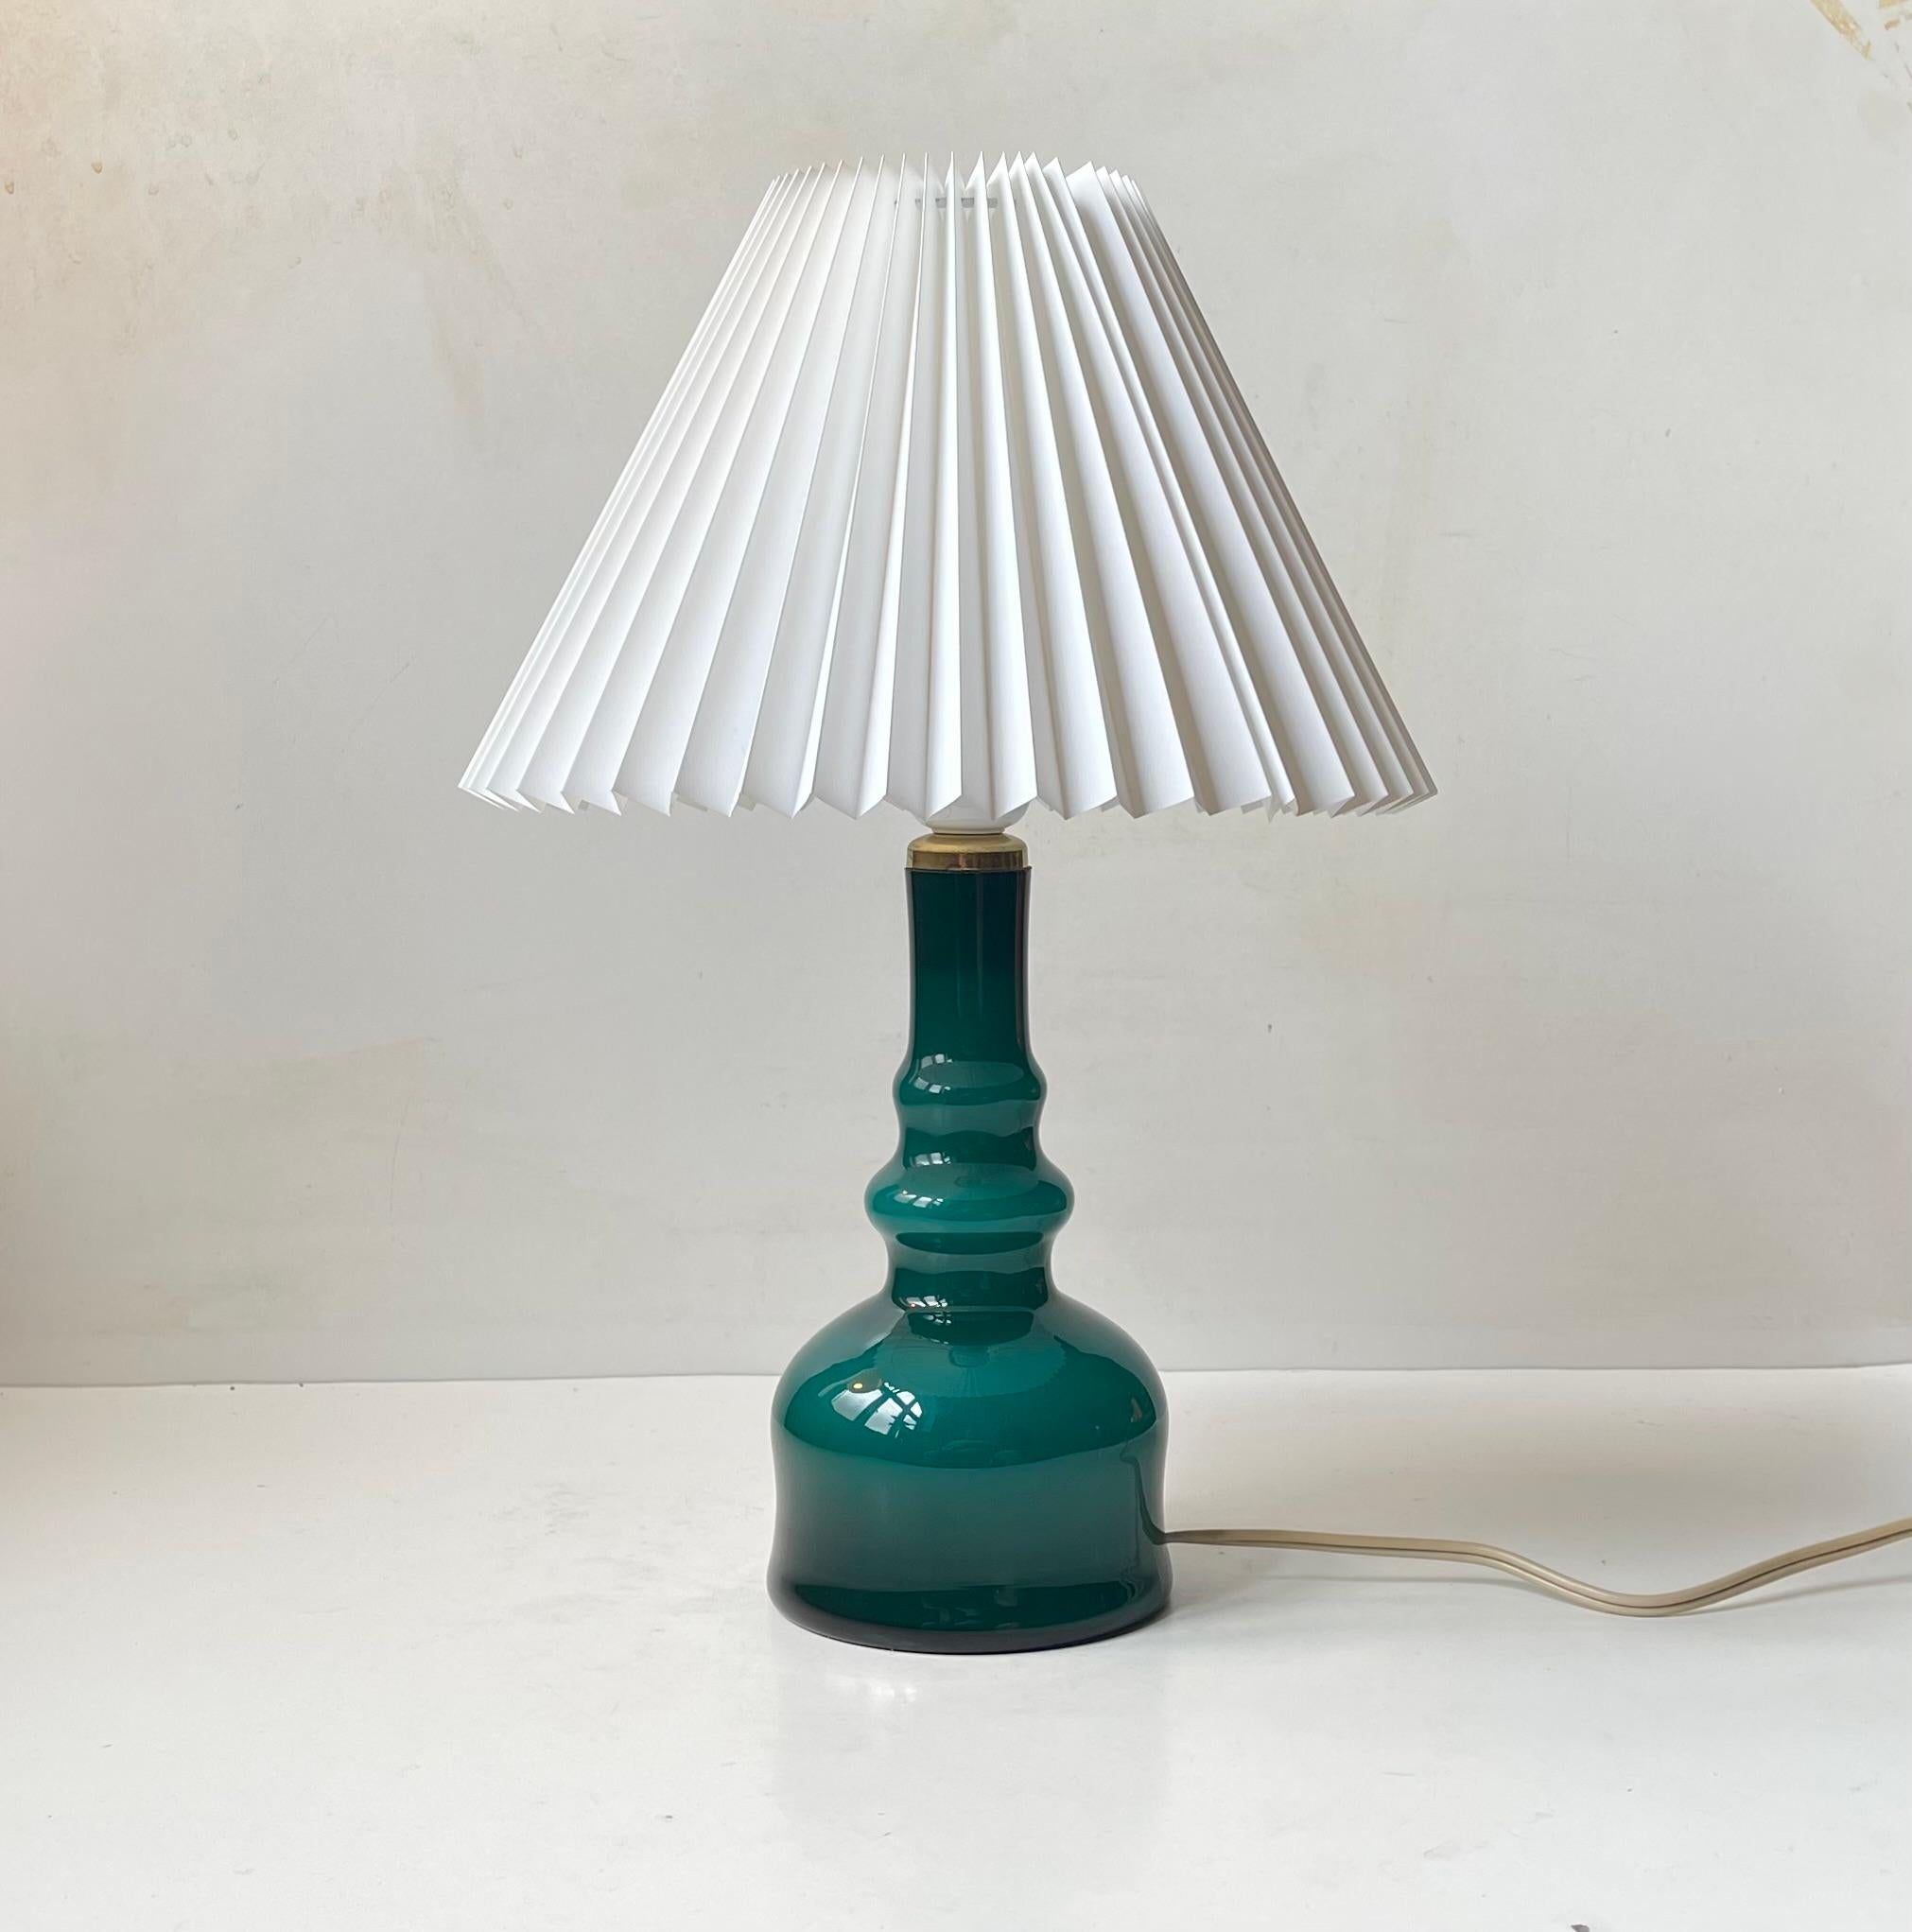 A teal green cased glass table lamp designed by Per-Olaf Ström in the 1960s and made at Alsterfors Glasbruk in Sweden. Often falsely attributed to Michael Bang for Holmegaard in his Palet series. This table light is fitted with a new fluted